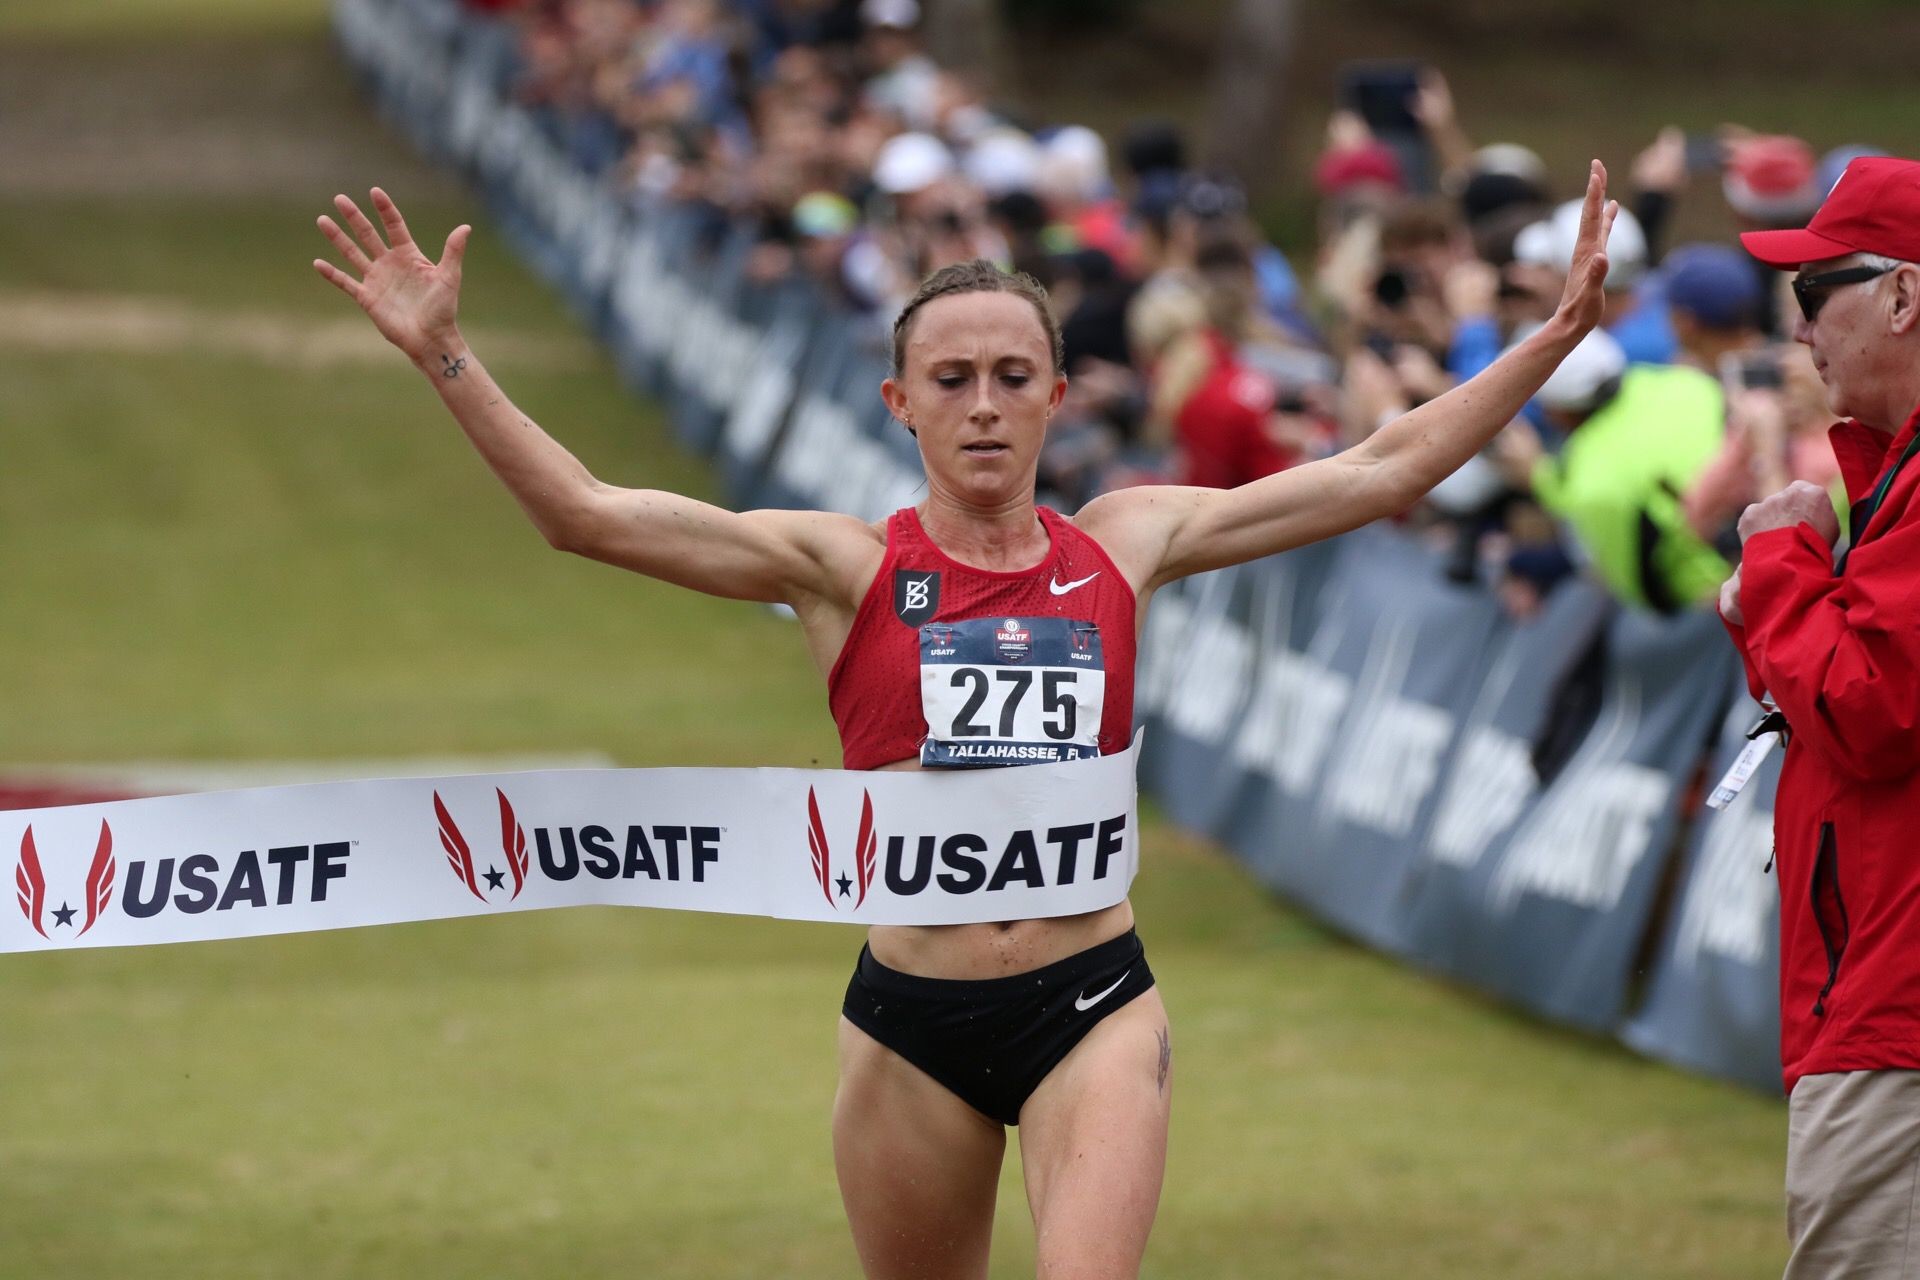 Shelby Houlihan won the USATF Cross-Country Championships and is becoming one of the most dominant American runners